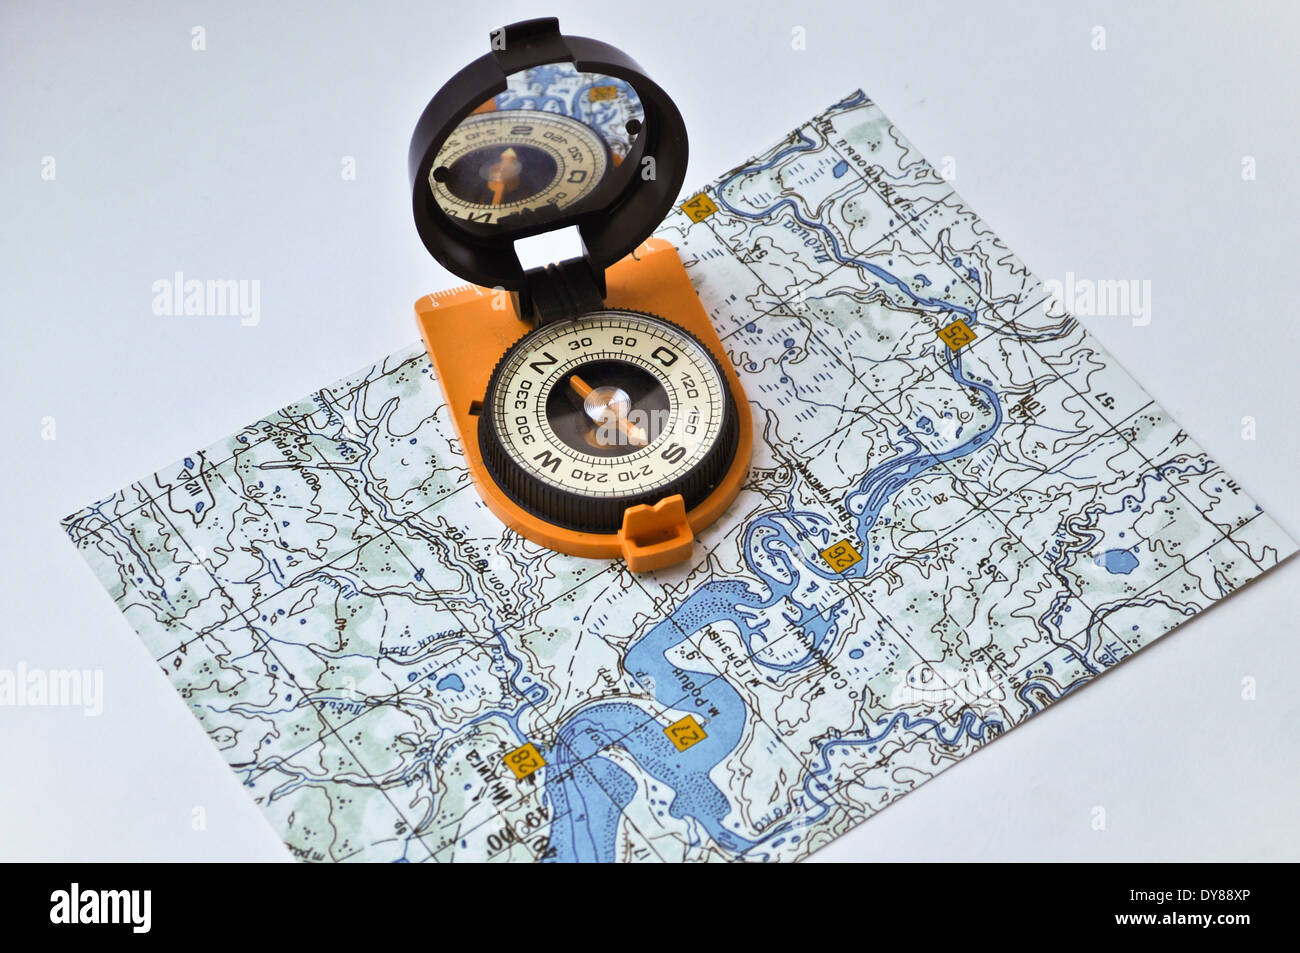 Topographic map lies on a white background, and there is a magnetic compass in a black case on an orange ground. Stock Photo